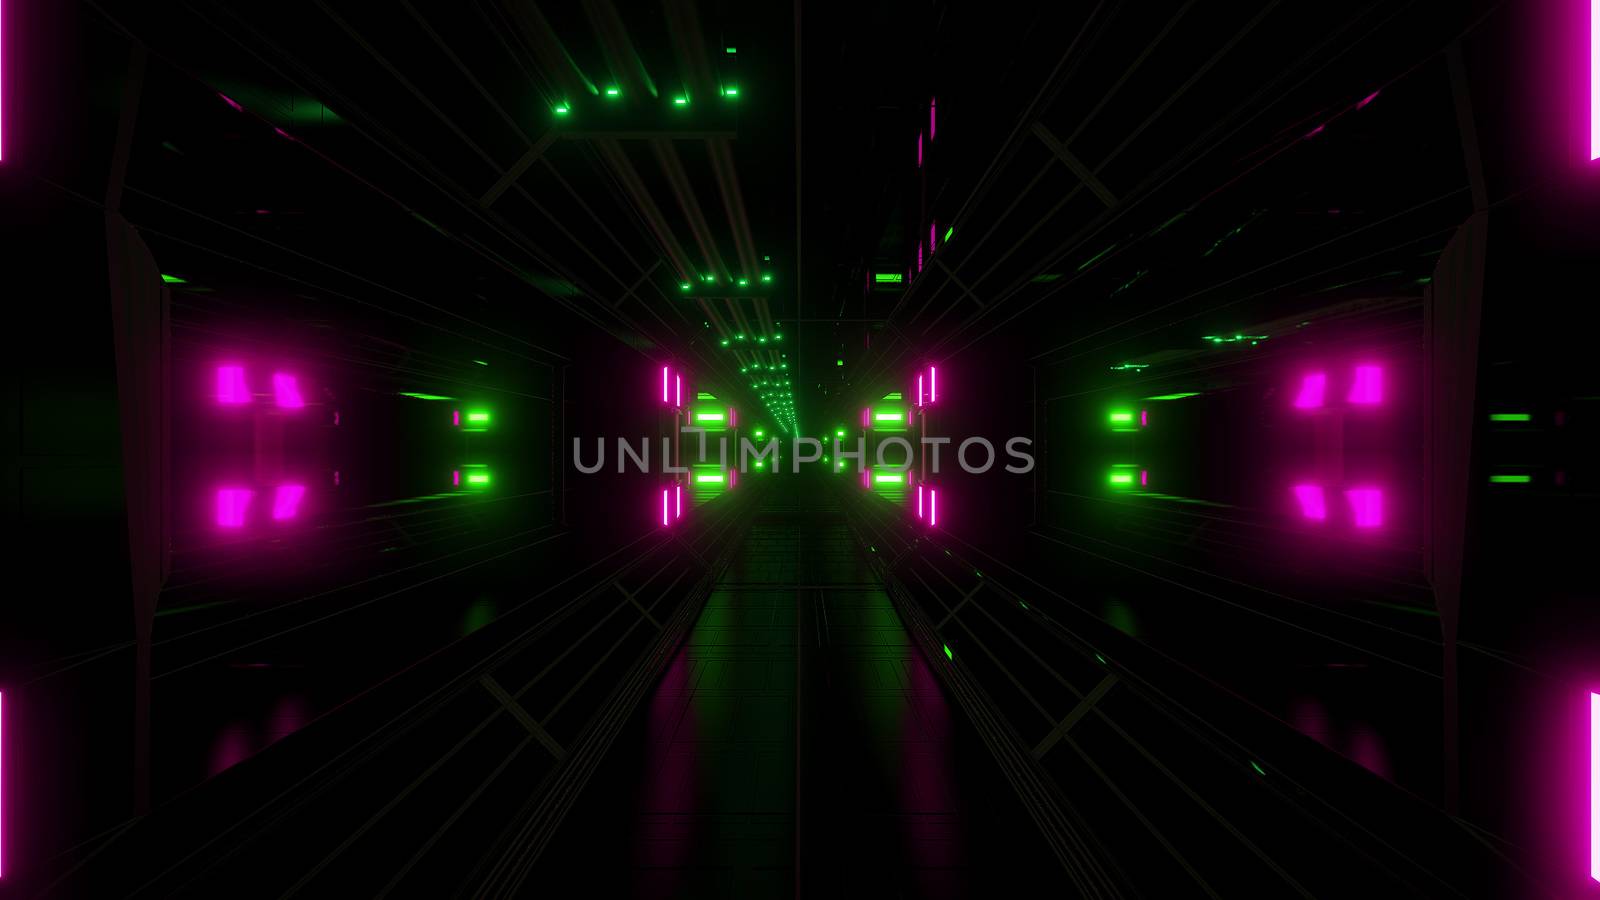 futuritstic science fiction space hangar tunnel background , modern future living spaceship wallpaper